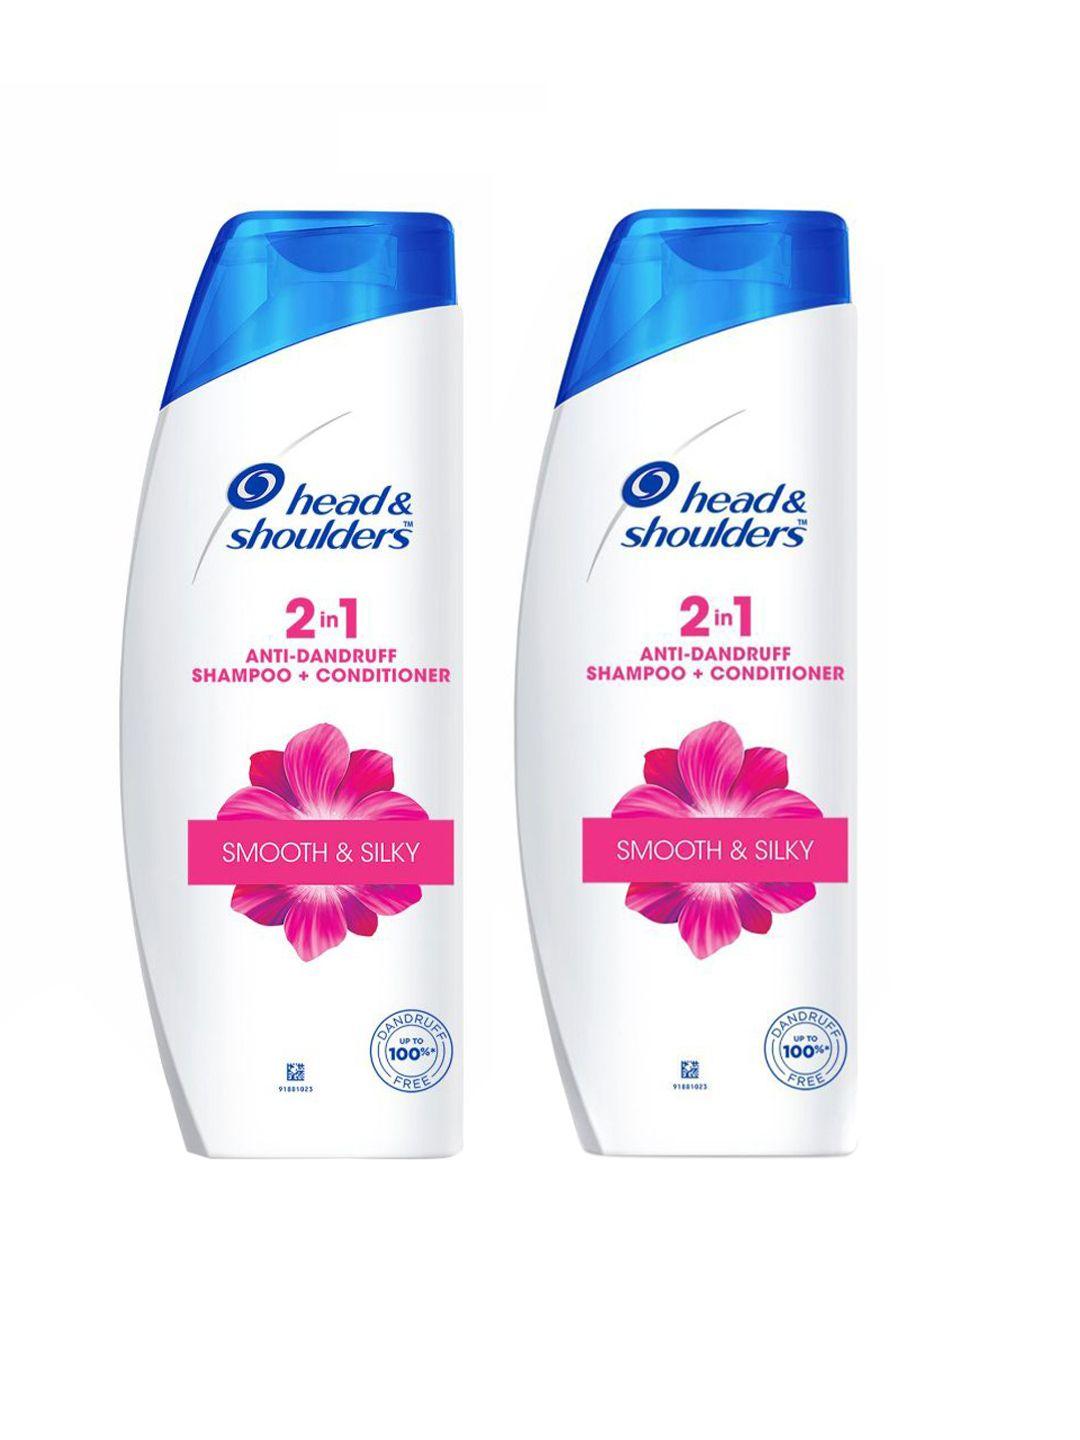 head-&-shoulders-set-of-2-smooth-&-silky-2-in-1-anti-dandruff-shampoo-&-conditioner